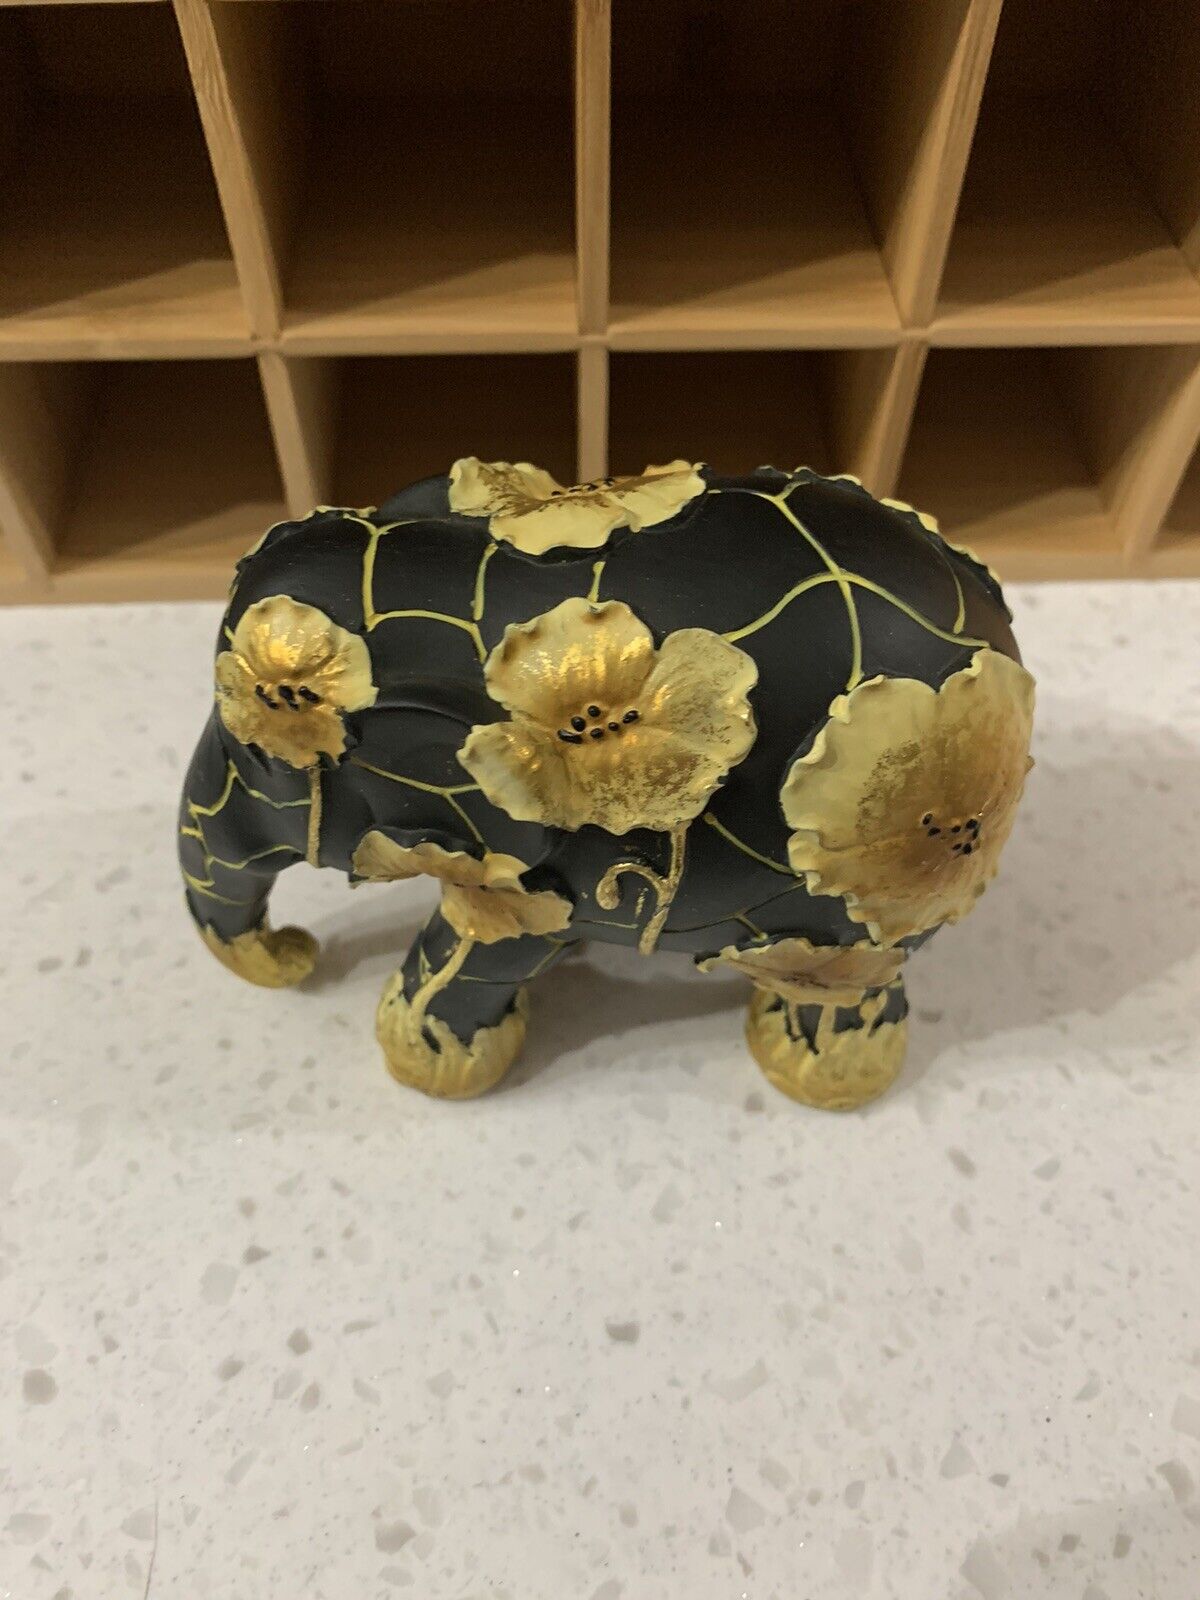 Elephant Parade GOLDEN POPPIES (24602) Limited Edition 1,221 / 10,000, Westland